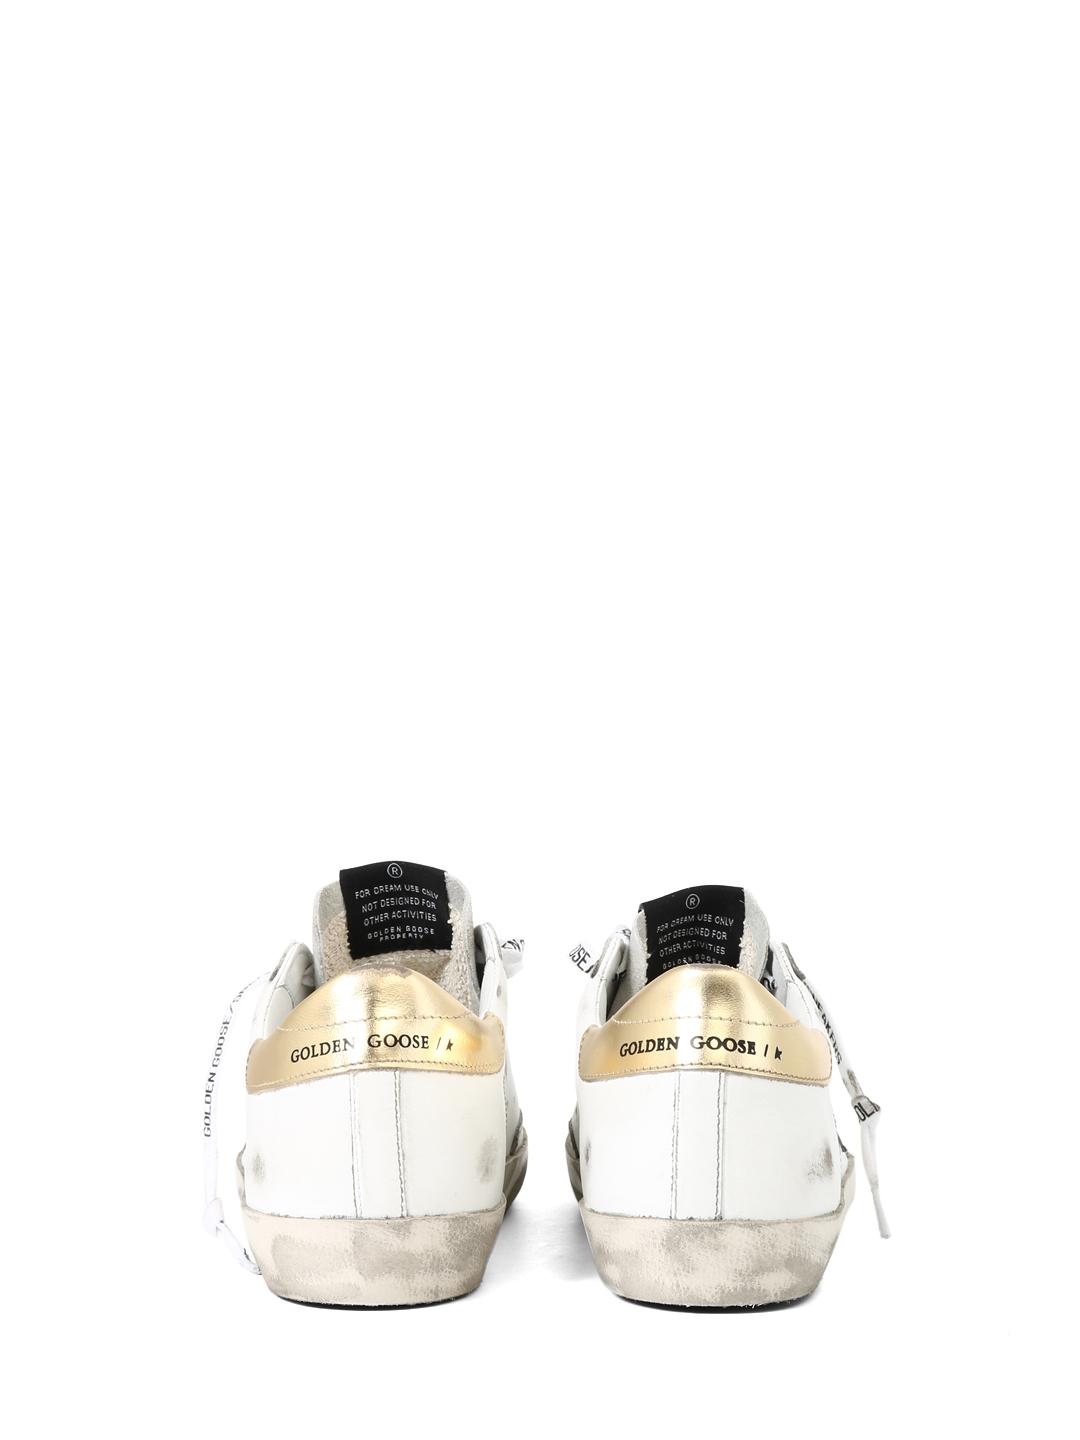 Golden Goose Superstar Leo-star Leather Low-top Sneakers in White - Lyst